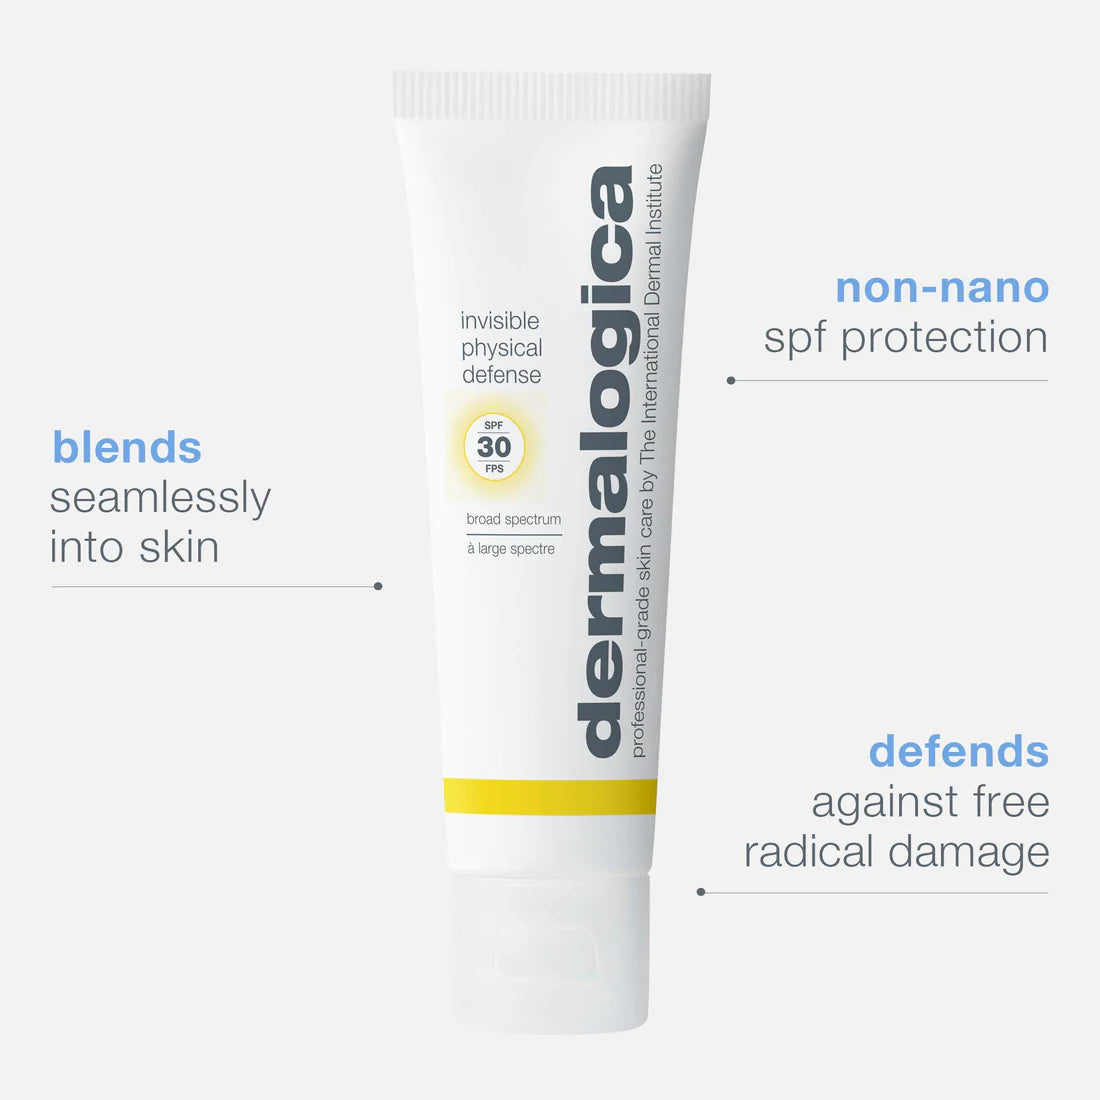 Dermalogica Invisible Physical Defense Mineral Sunscreen spf30